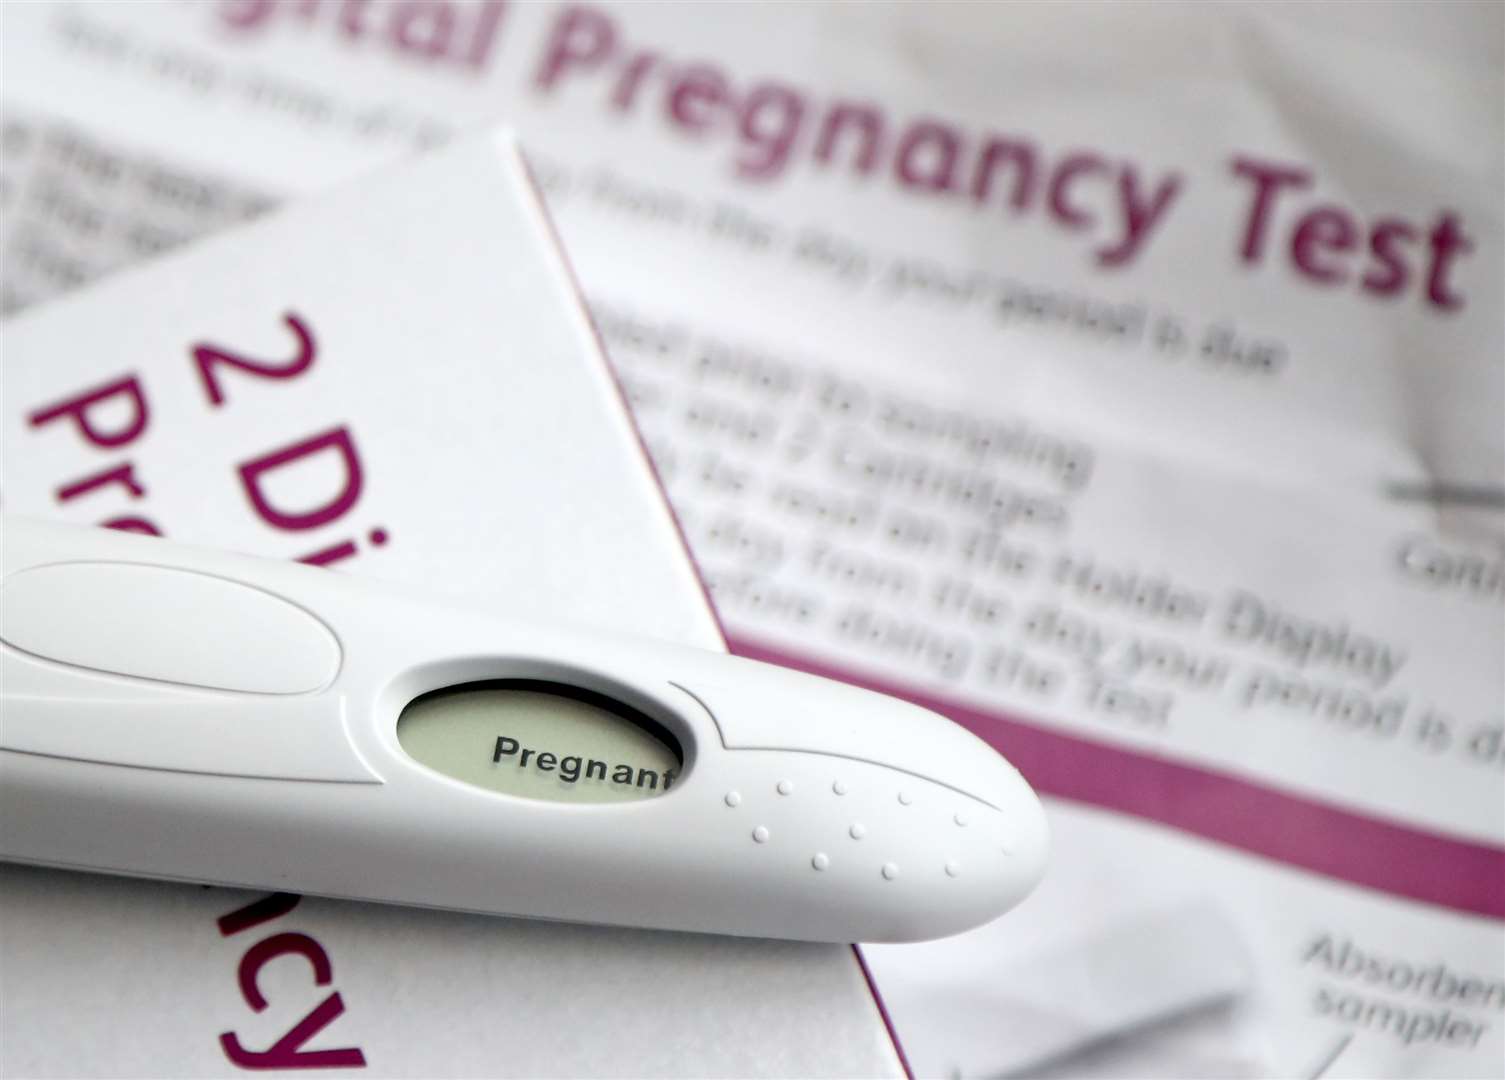 Lord Bethell outlined how a theoretical ‘pregnancy test type’ device might be used to determine if you have Covid-19 on a daily basis (Gareth Fuller/PA)